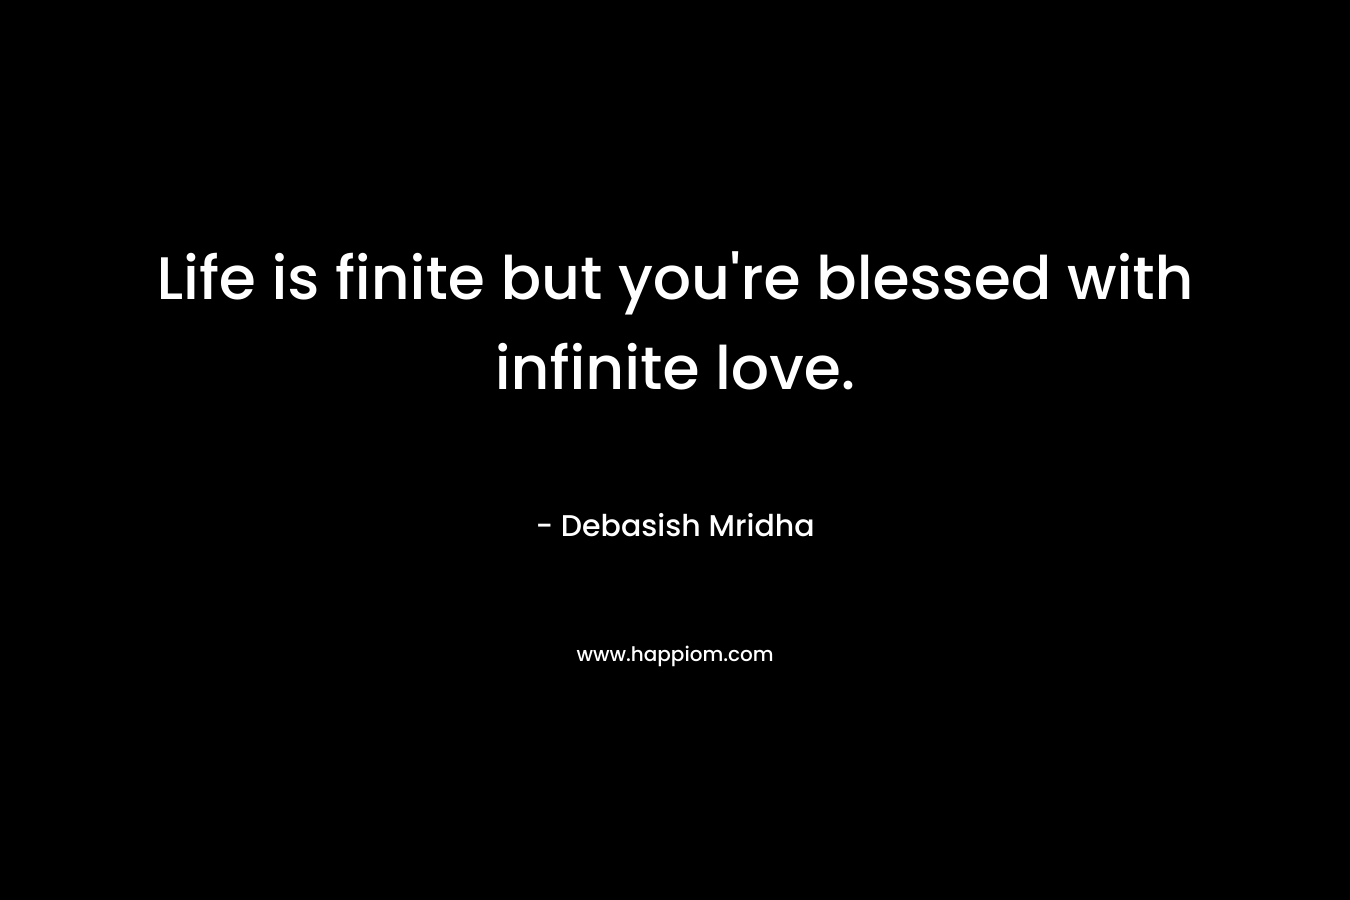 Life is finite but you're blessed with infinite love.